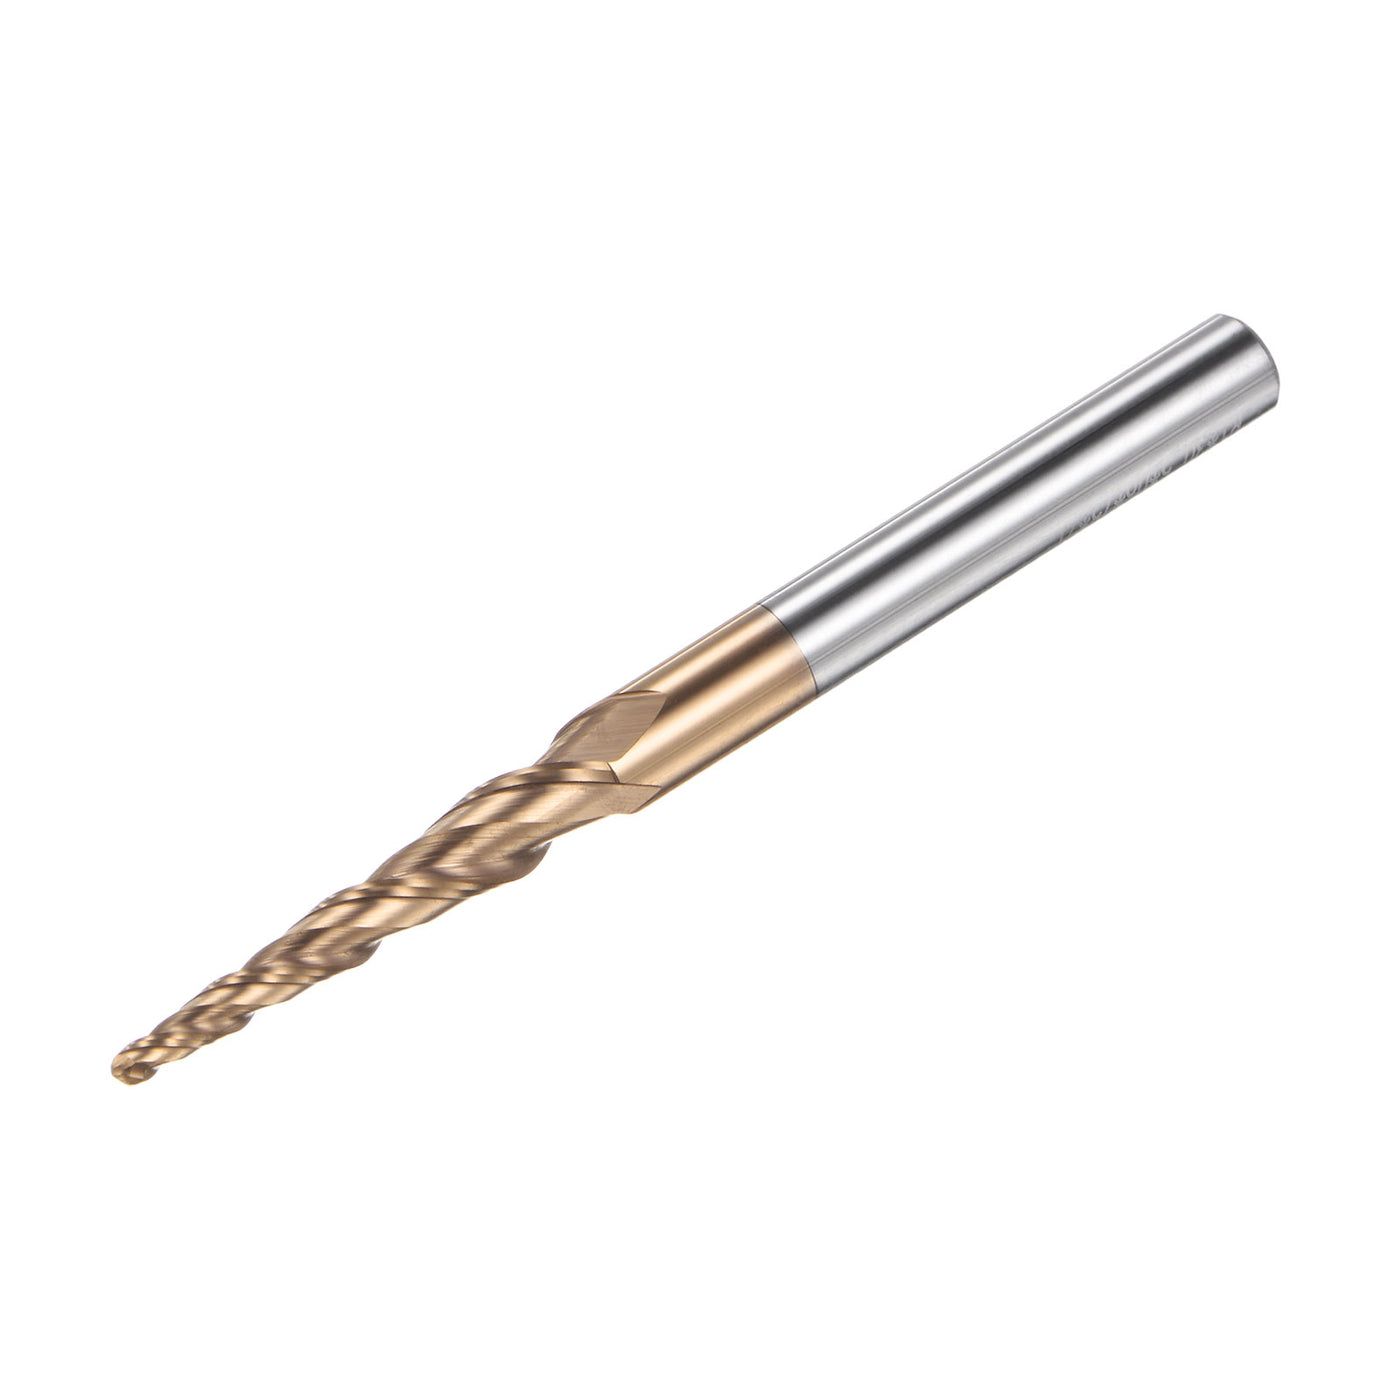 uxcell Uxcell 2mm x 6mm 7.3 Degree Angle TiSiN Coated Carbide Tapered Ball Nose End Mill